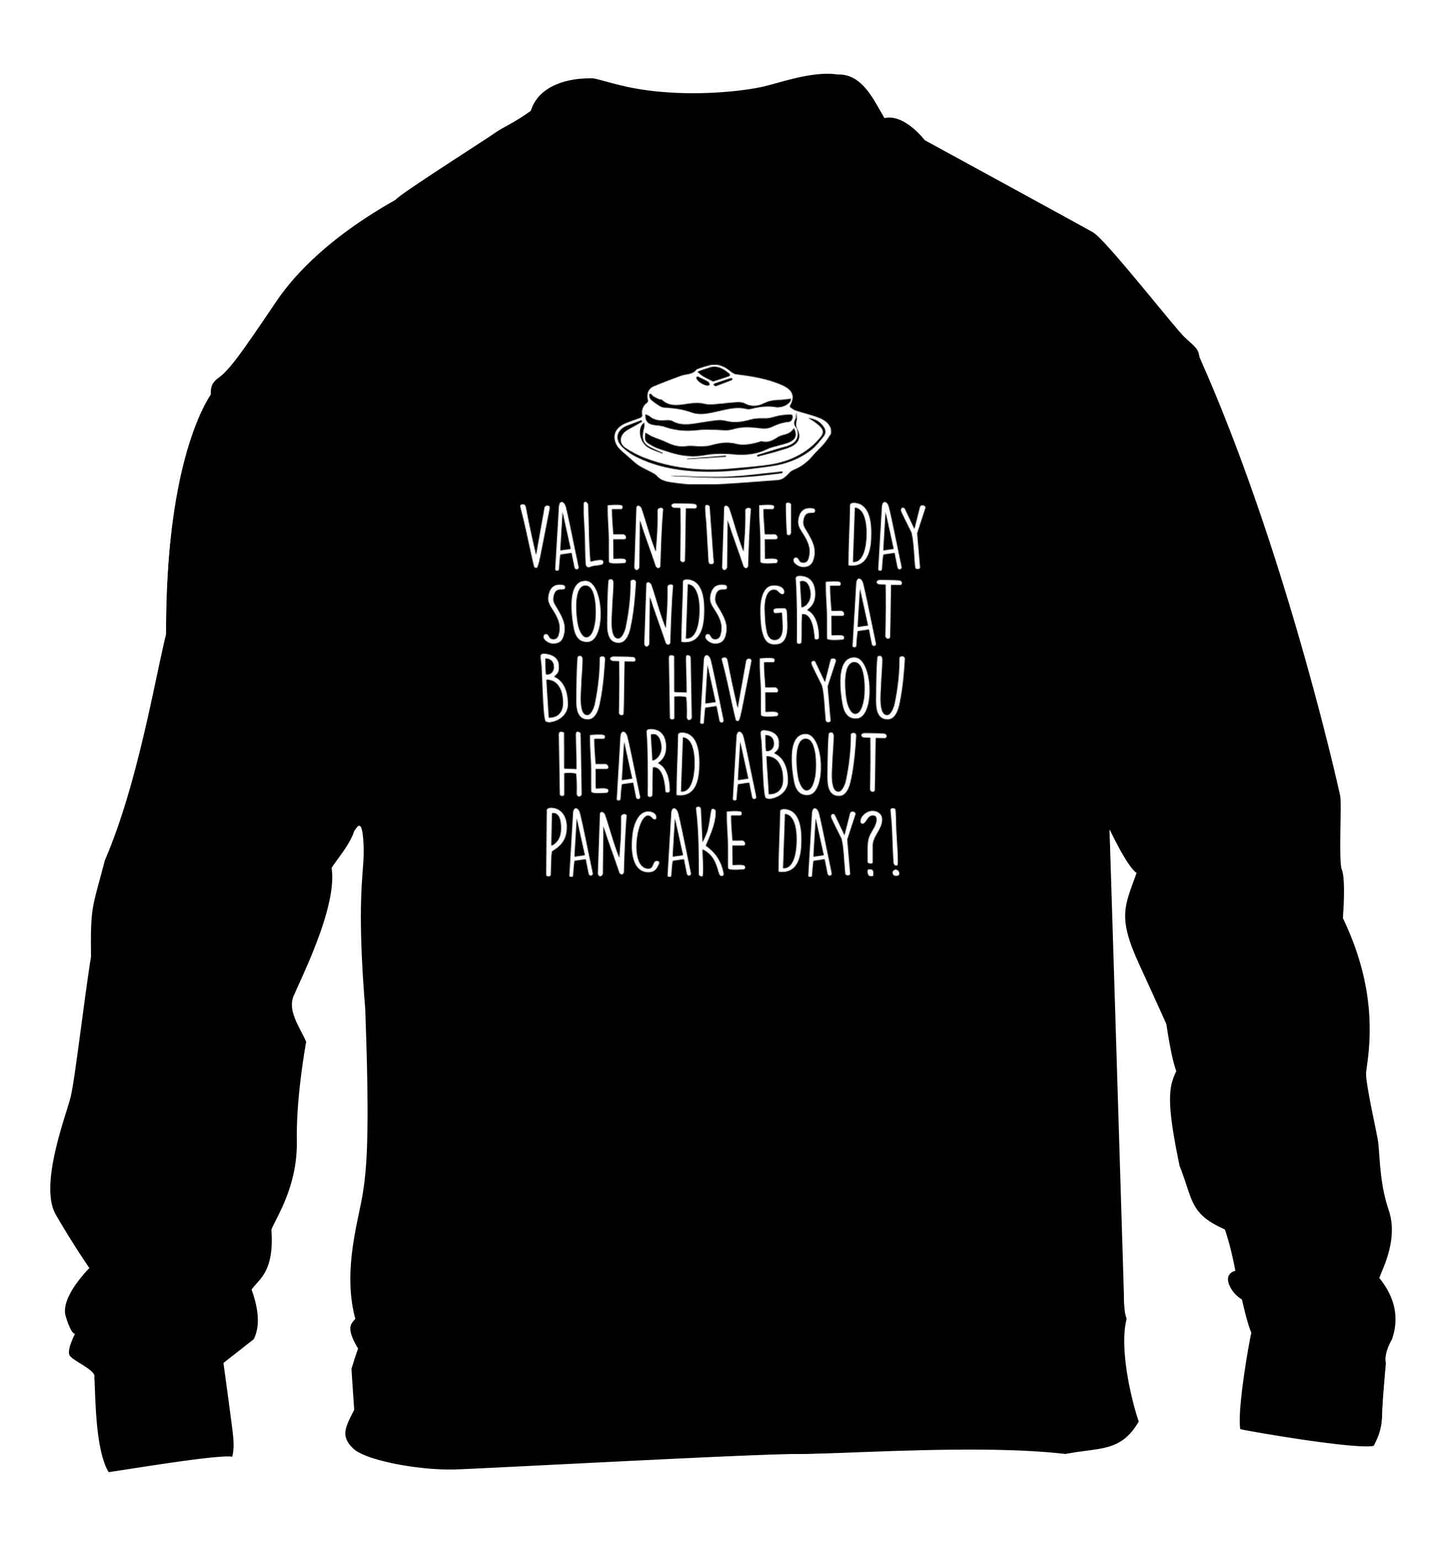 Valentine's day sounds great but have you heard about pancake day?! children's black sweater 12-13 Years